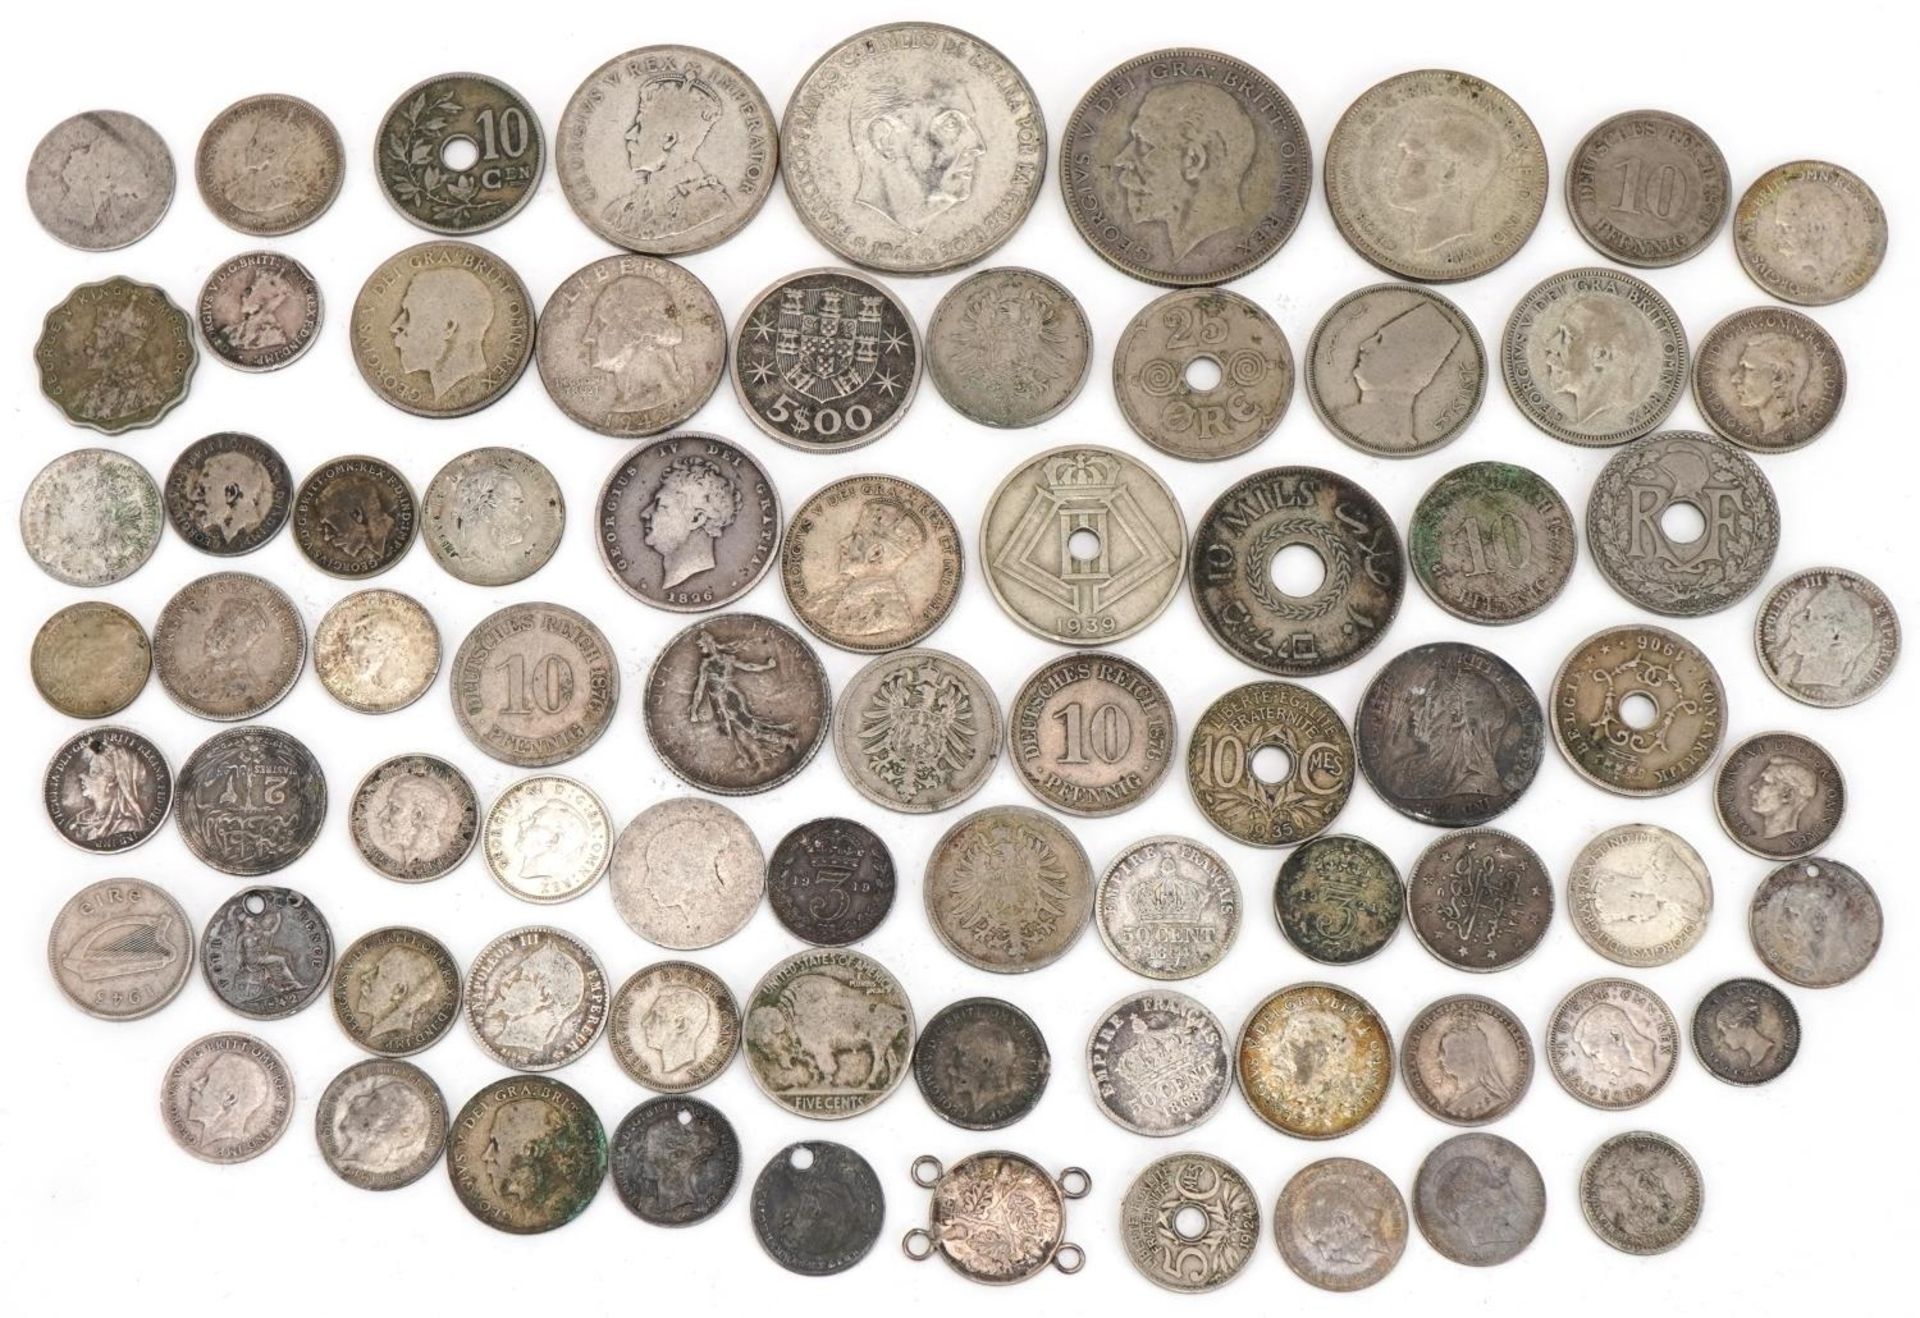 British and world coinage including one hundred ptas, half crowns and 1870 maundy twopence, 250g : - Image 4 of 6